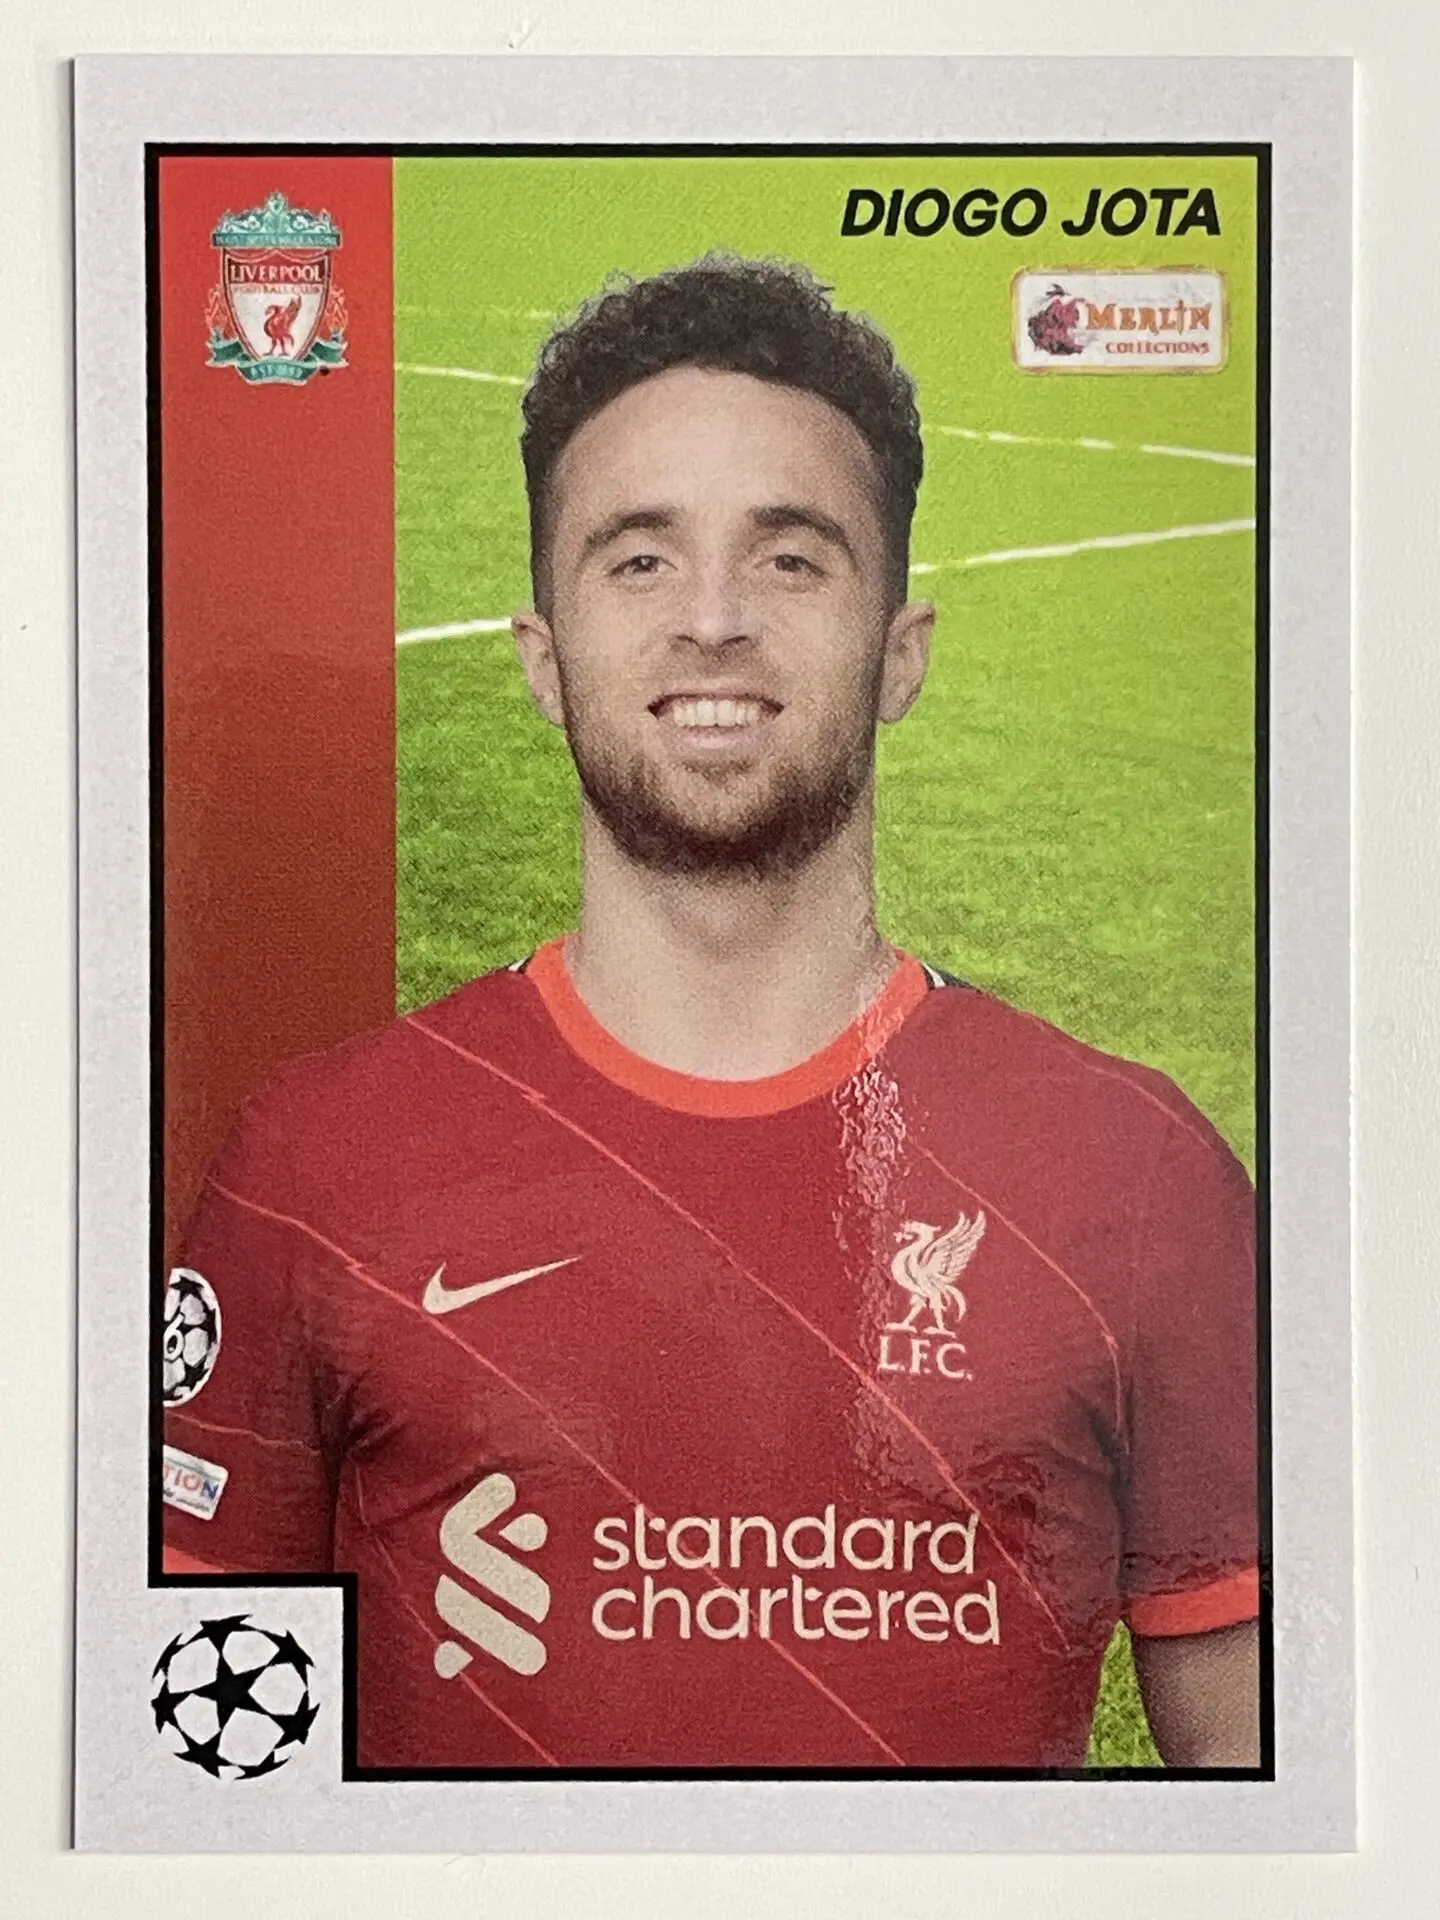 014 Diogo Jota Liverpool Base Topps Merlin Heritage 97 UEFA Champions  League Hobby Card